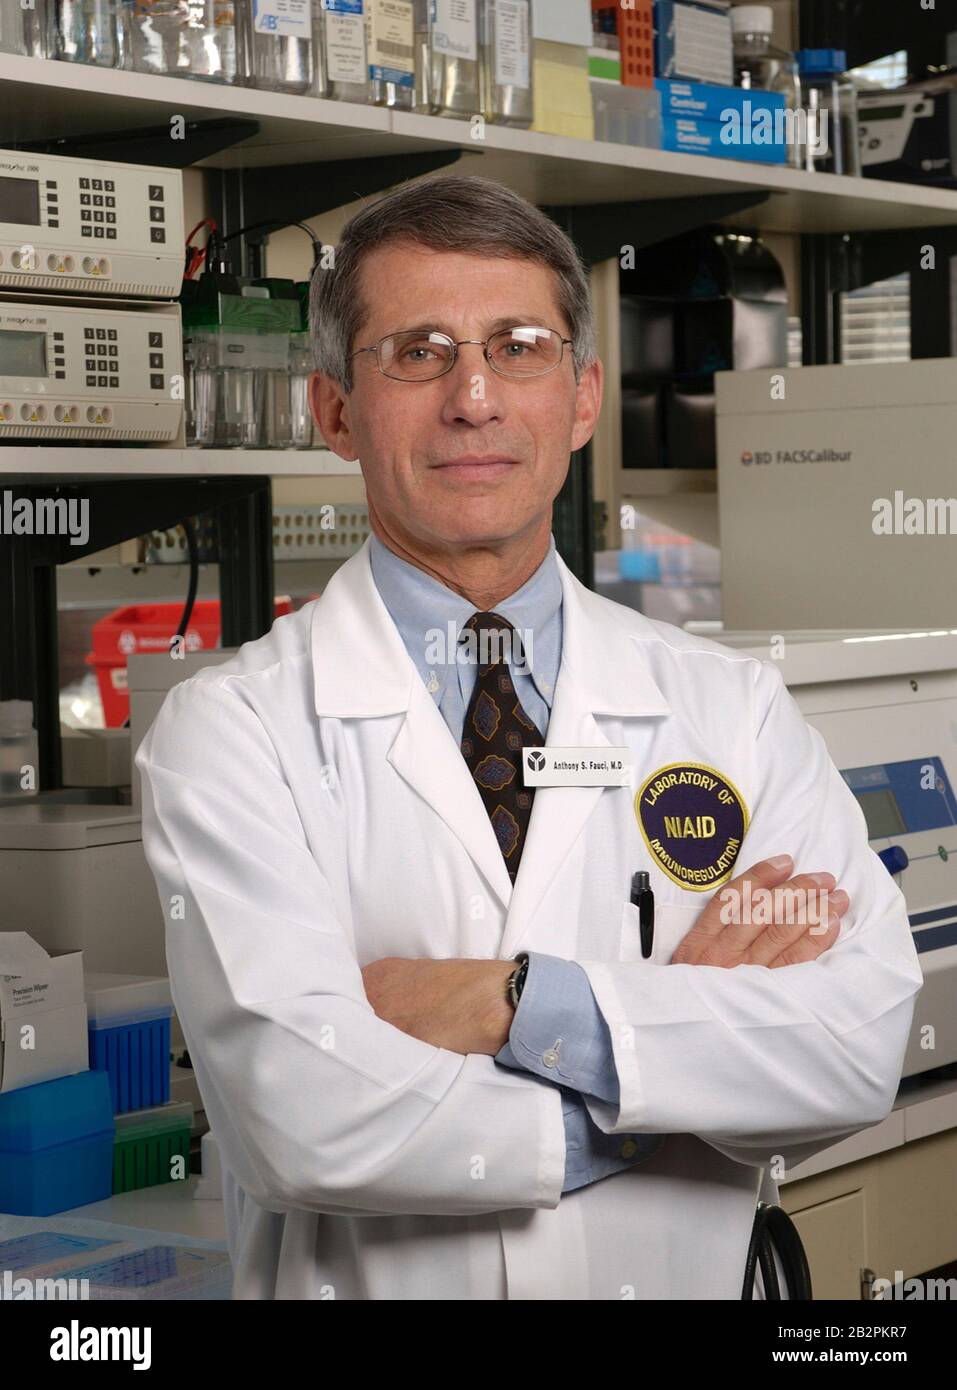 Dr. Anthony S. Fauci, M.D., Director of NIAID, National Institute of Allergy and Infectious Diseases, since 1984. He oversees an extensive research portfolio of basic and applied research to prevent, diagnose, and treat established infectious diseases such as HIV/AIDS, respiratory infections, diarrheal diseases, tuberculosis and malaria as well as emerging diseases such as Covid-19. Stock Photo